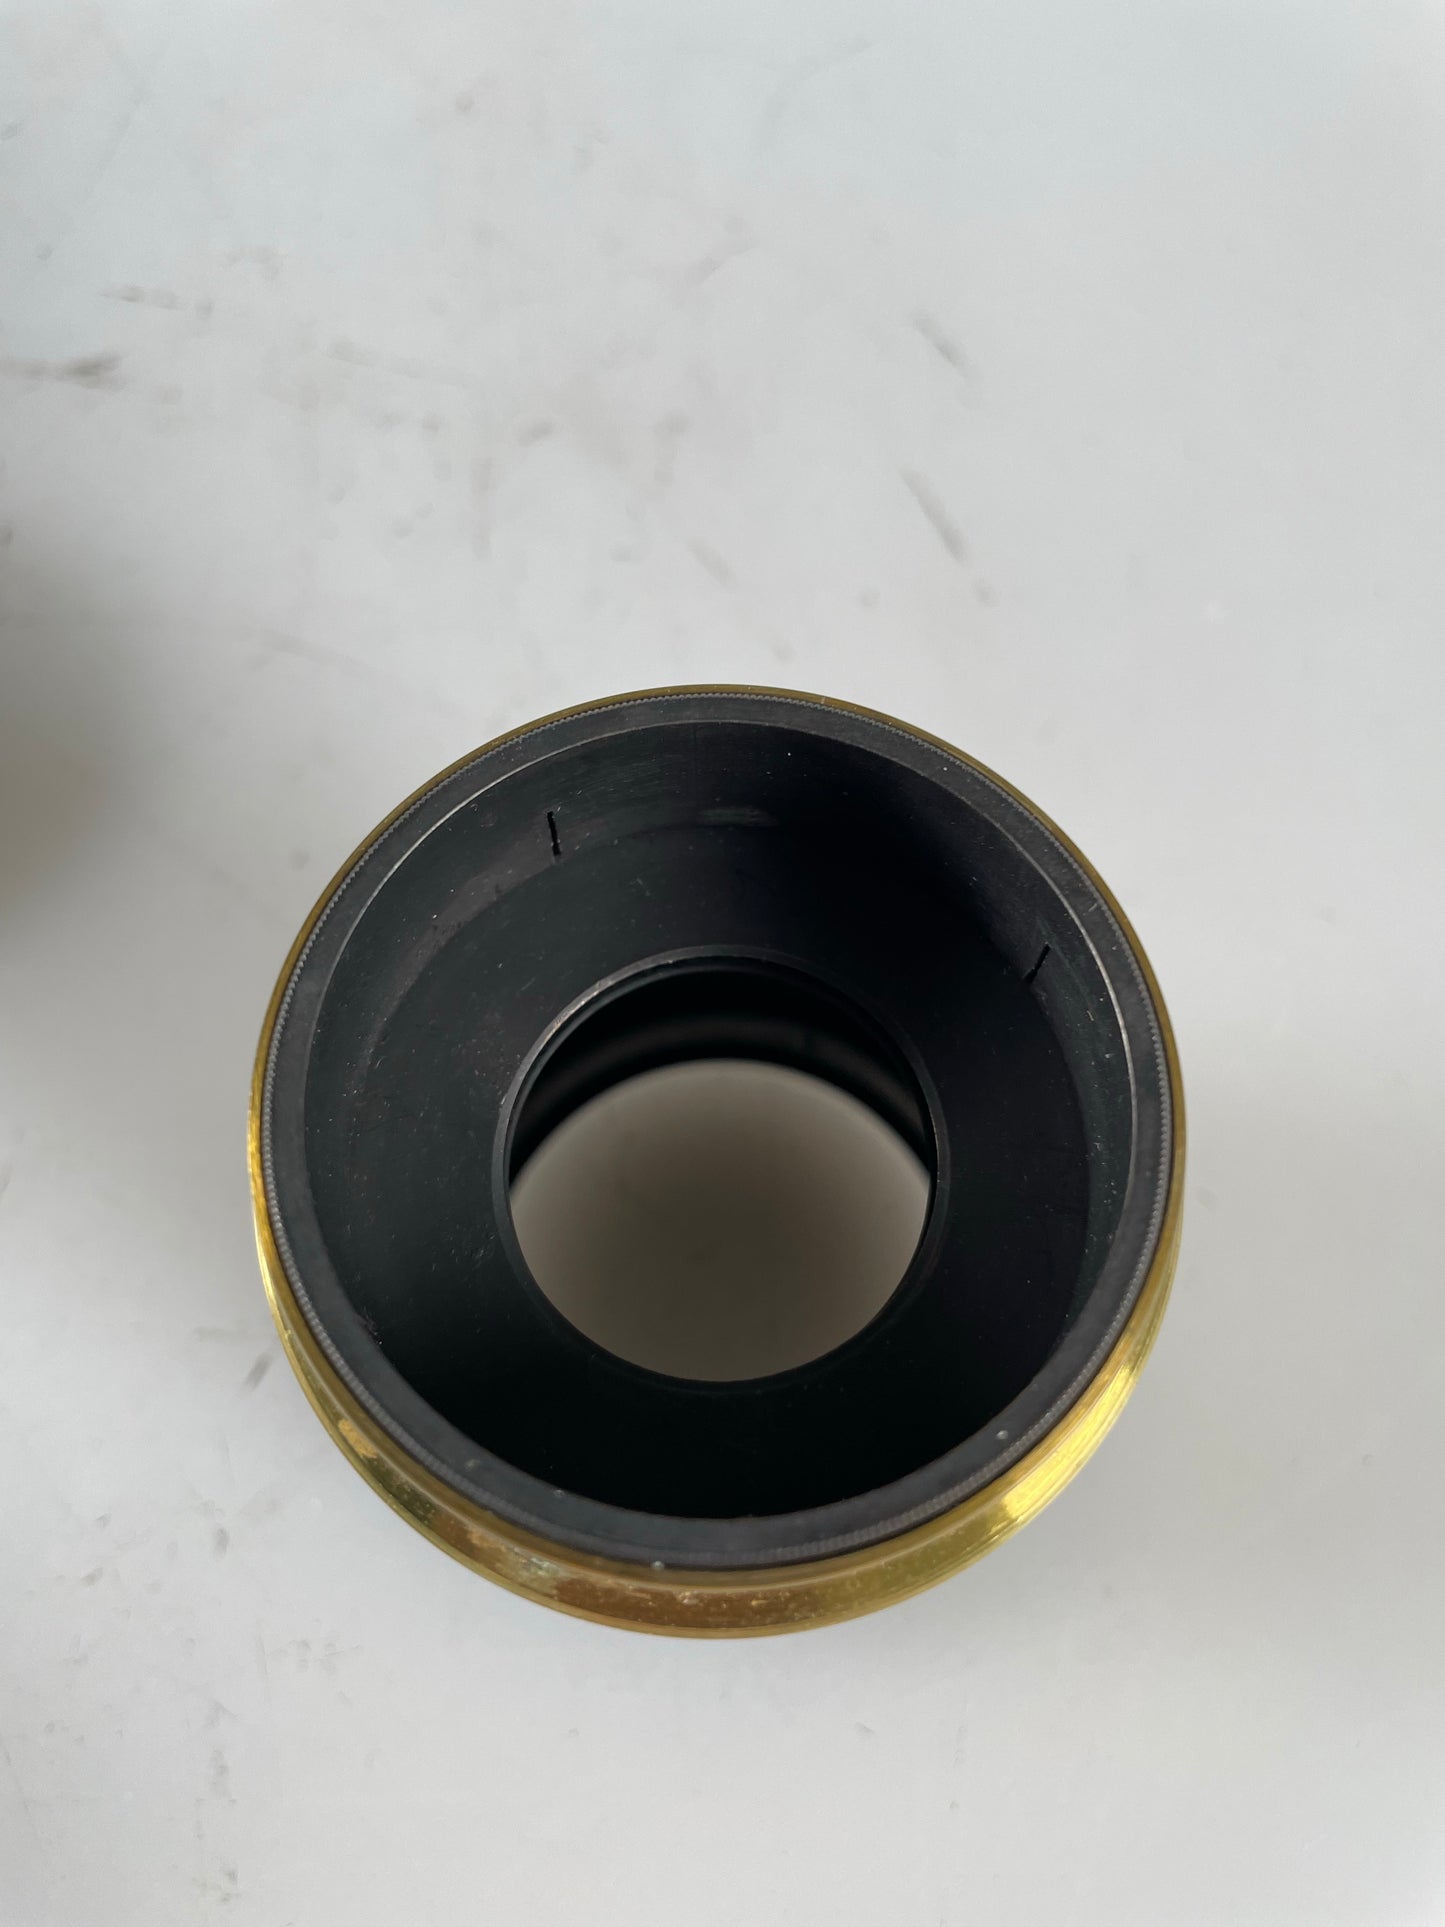 Unmarked Brass Lens with multiple interchangeable optics and waterstops